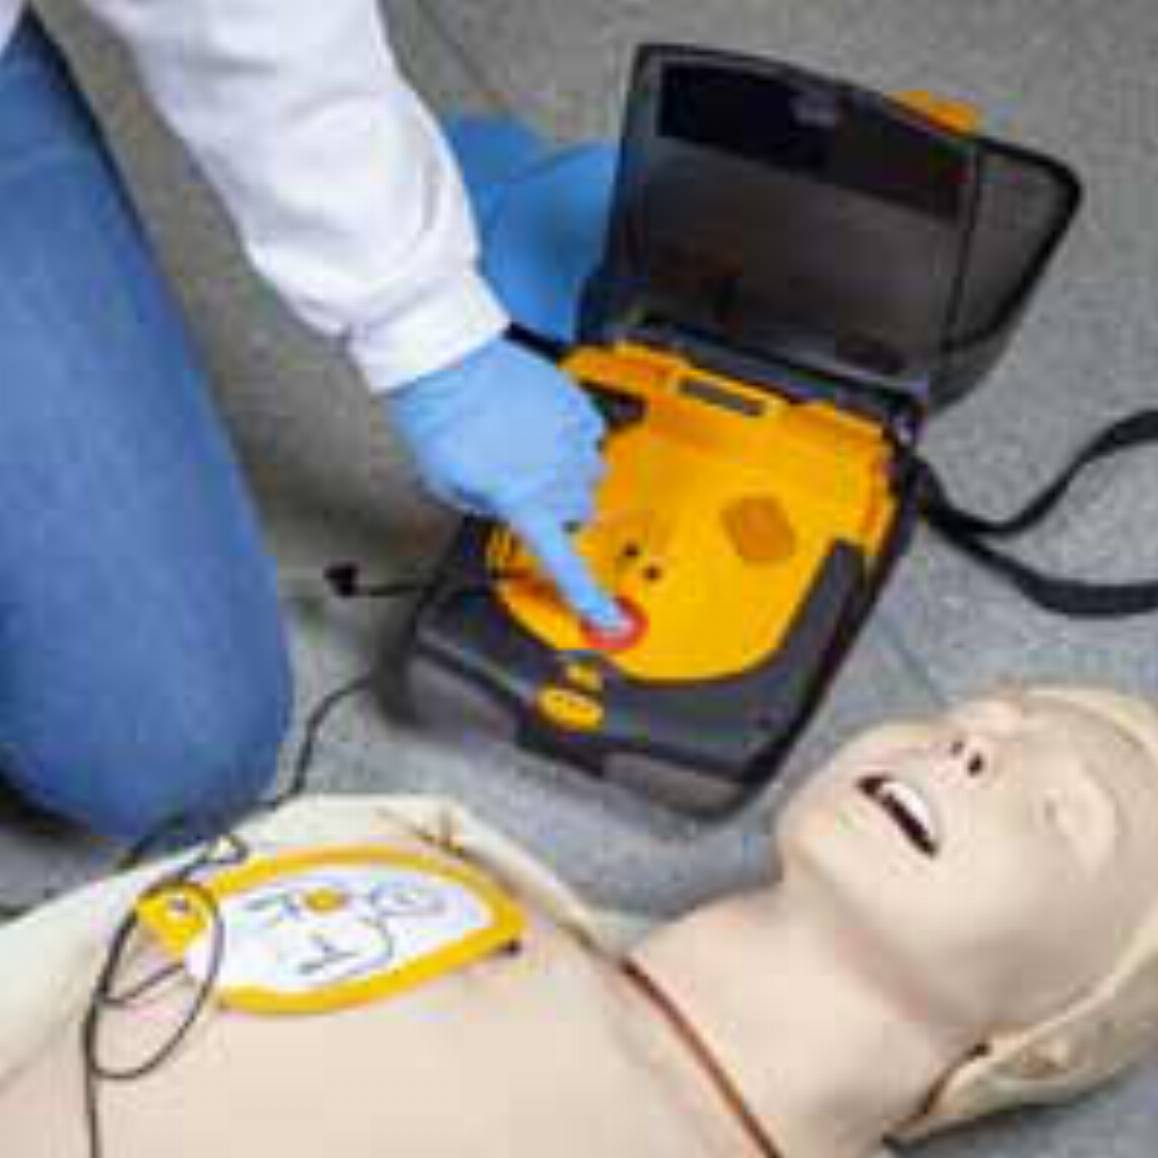 practicing CPR on a manikin